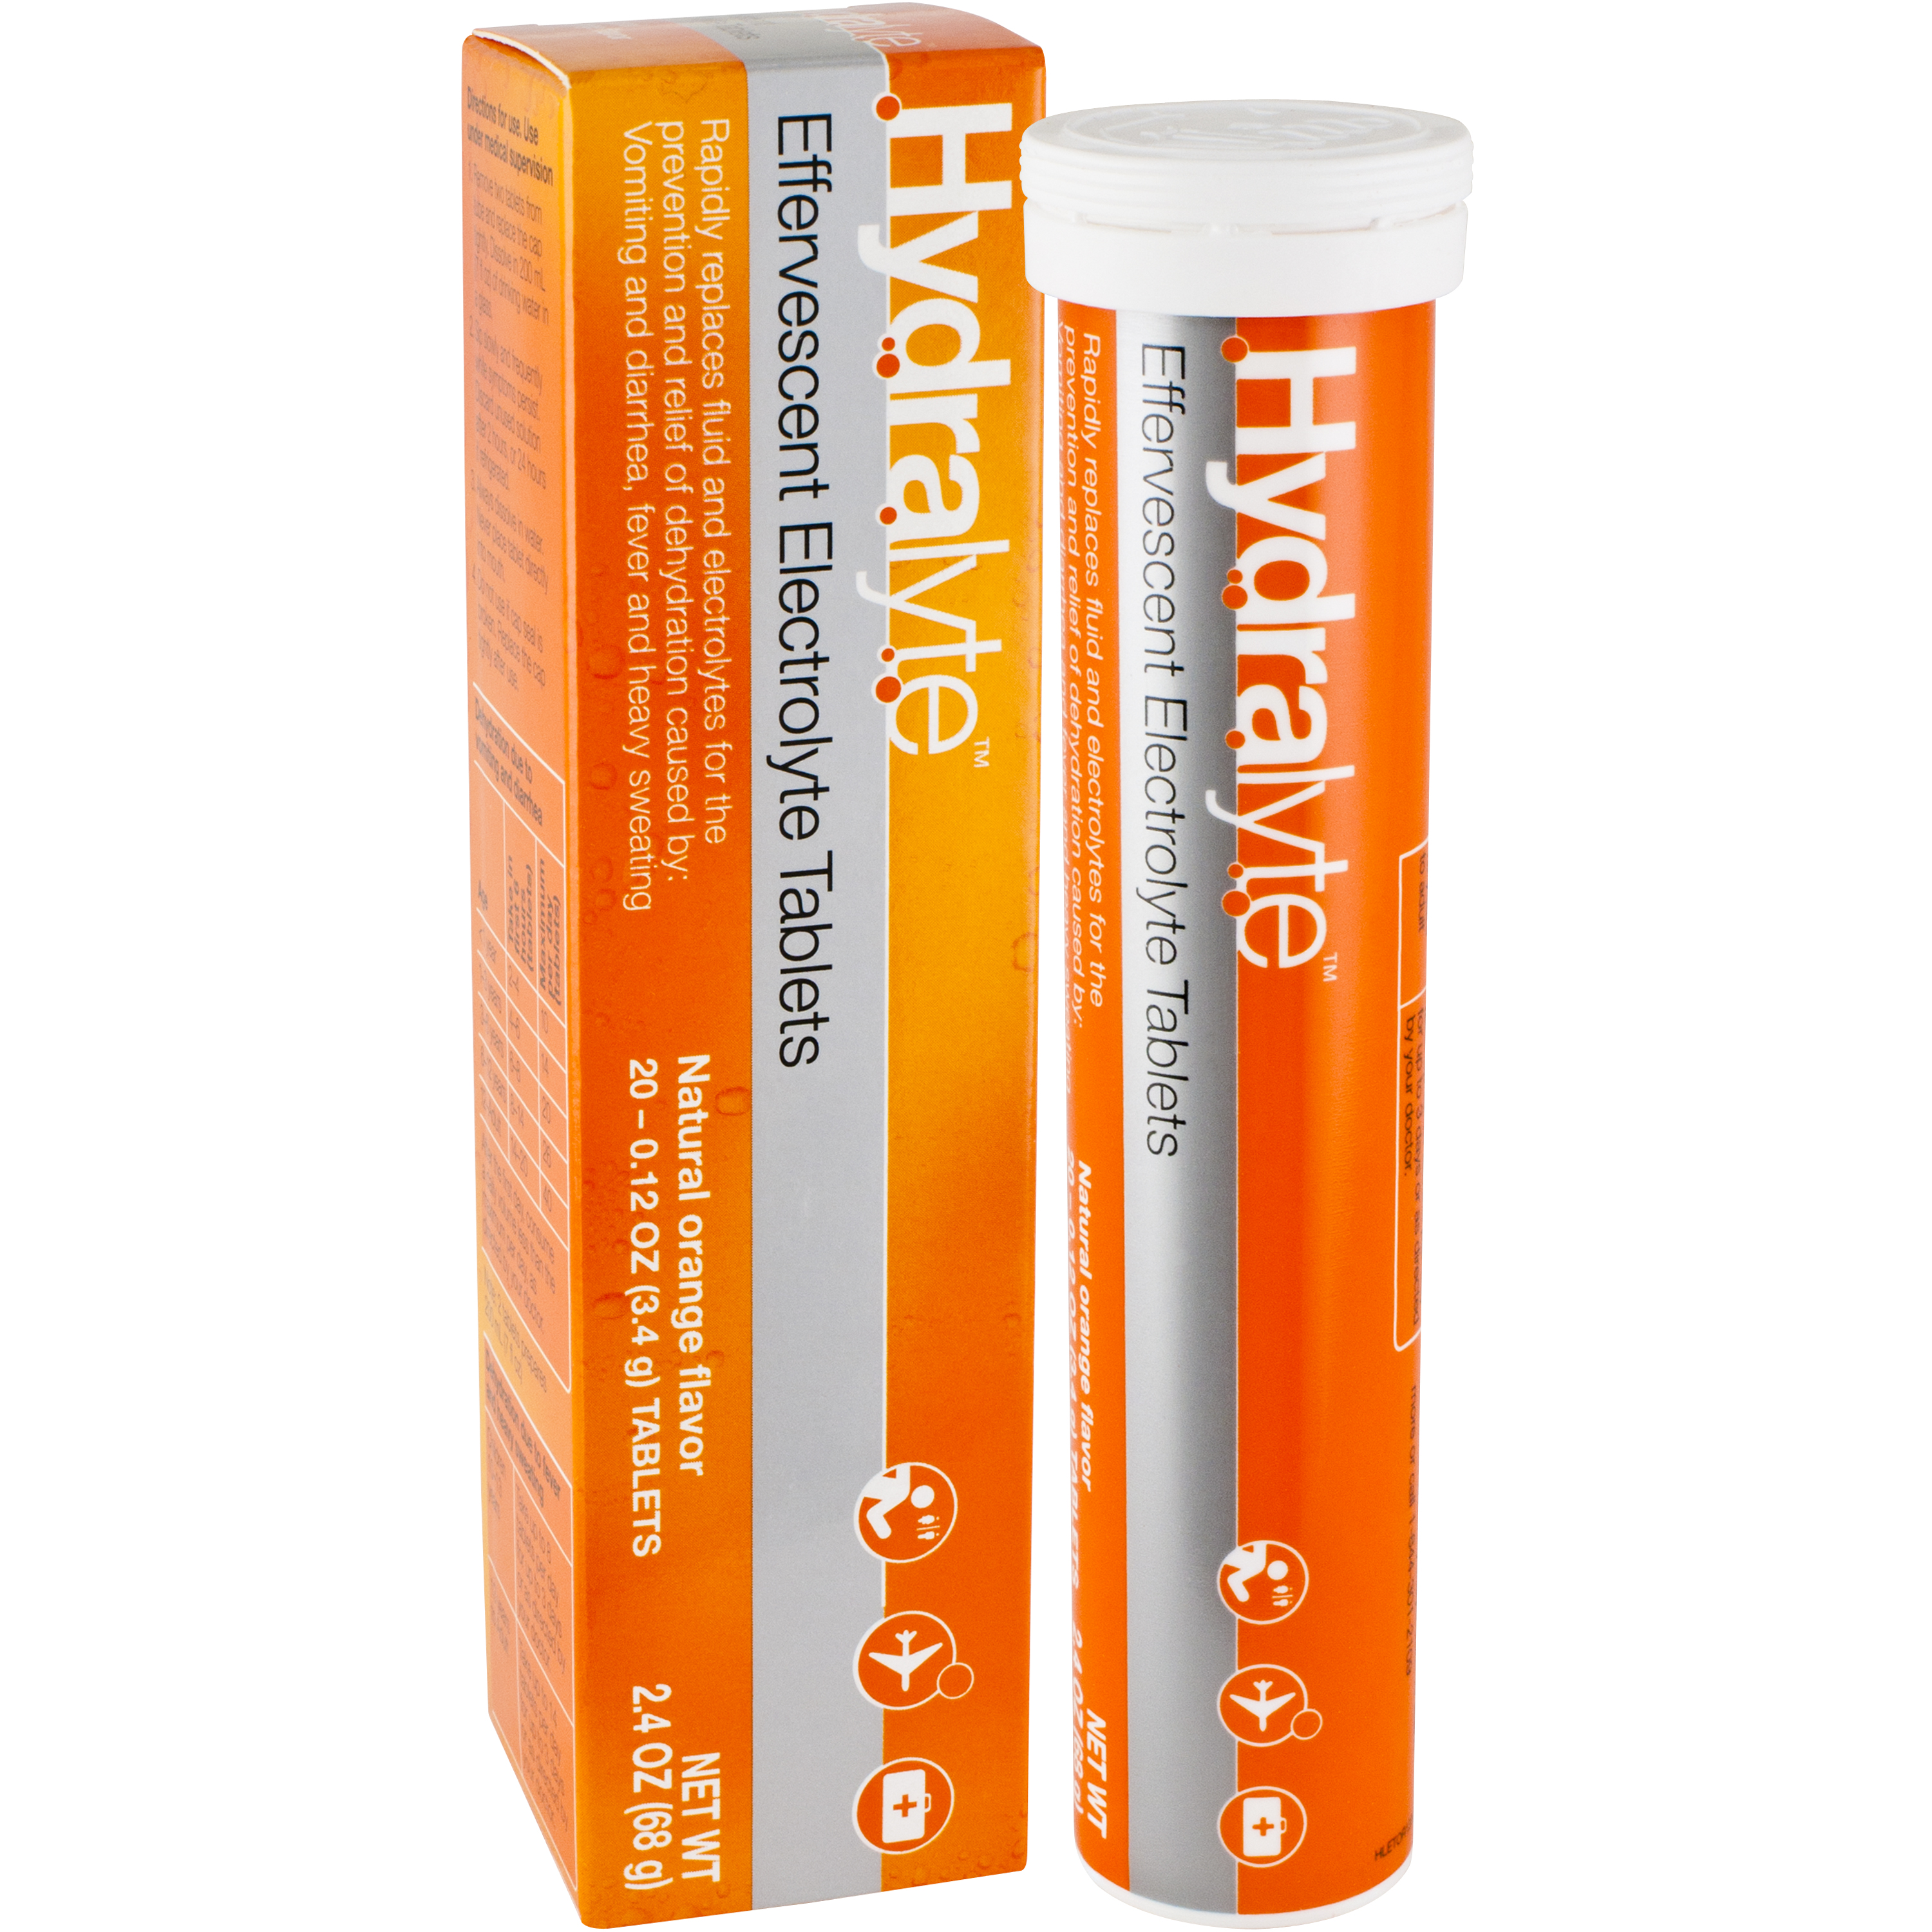 Orange Effervescent Tablets.  Scientifically formulated for rapid rehydration by Hydralyte